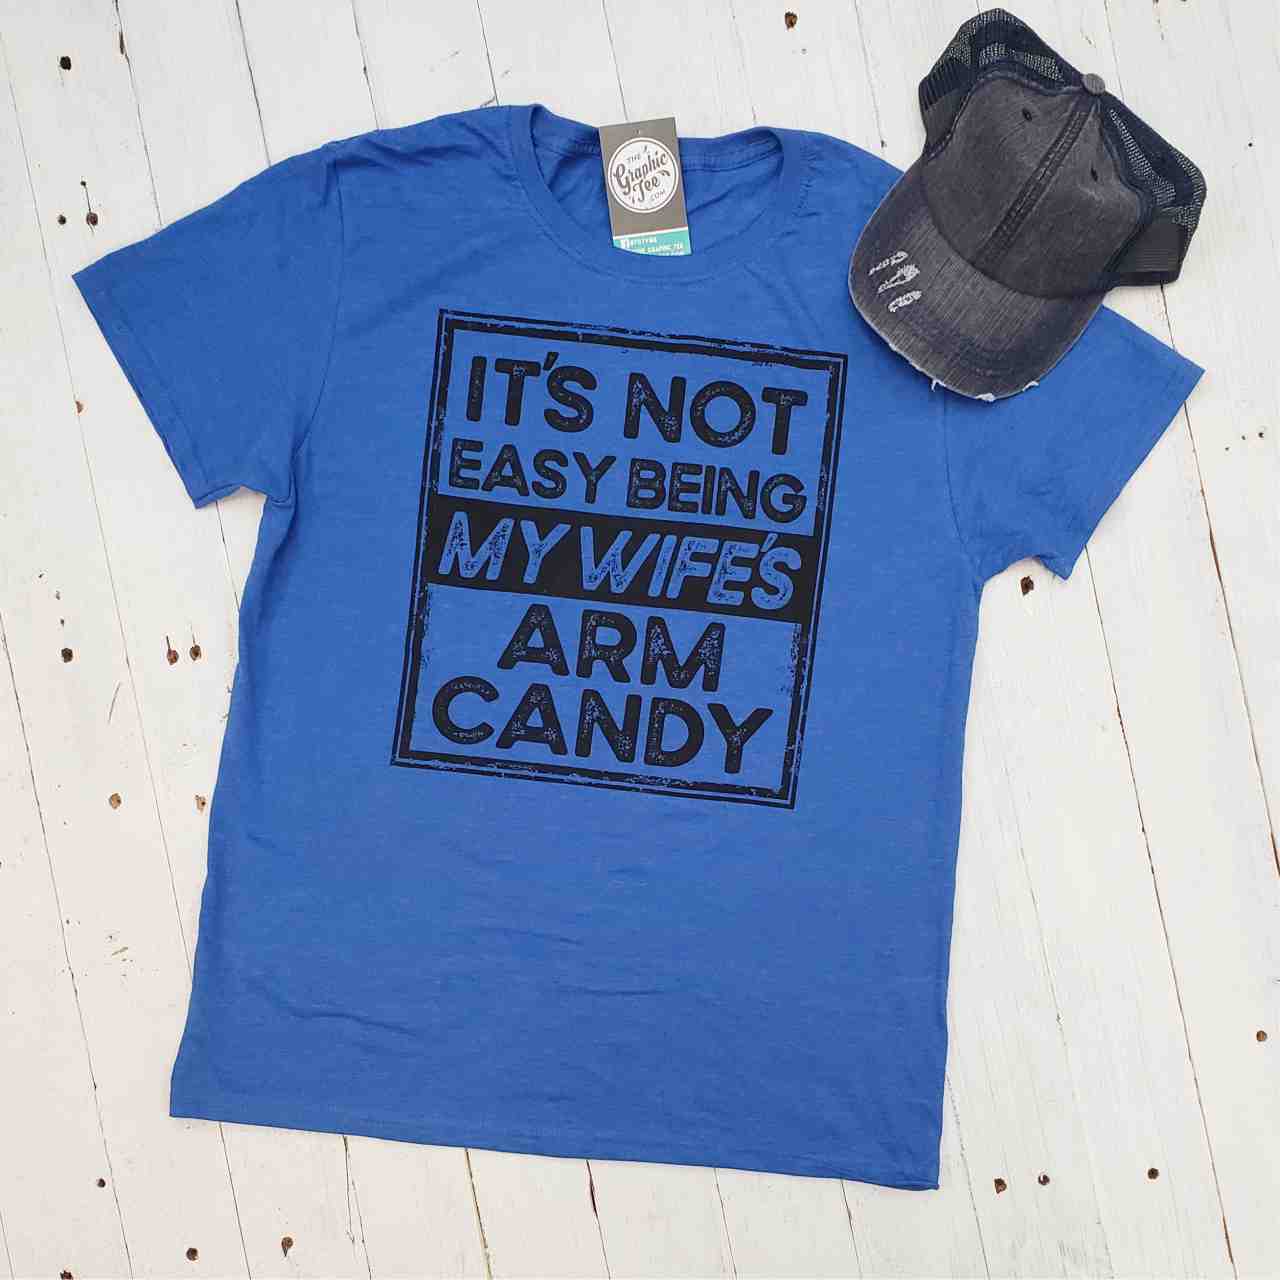 It's Not Easy Being My Wife's Arm Candy - Adult Tee - The Graphic Tee